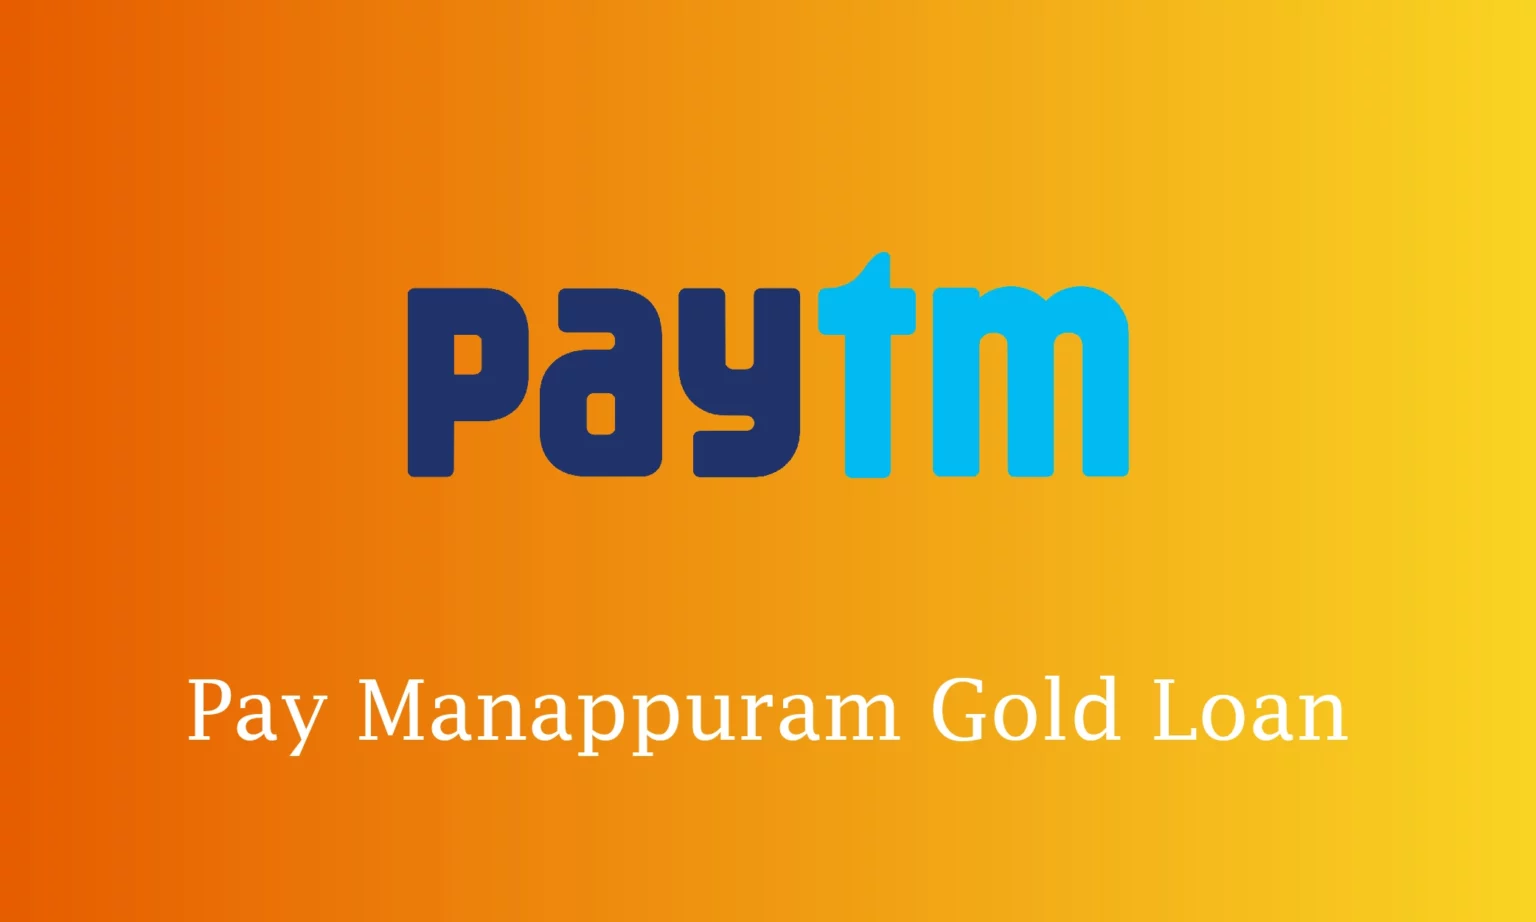 How to Pay Manappuram Gold Loan Paytm